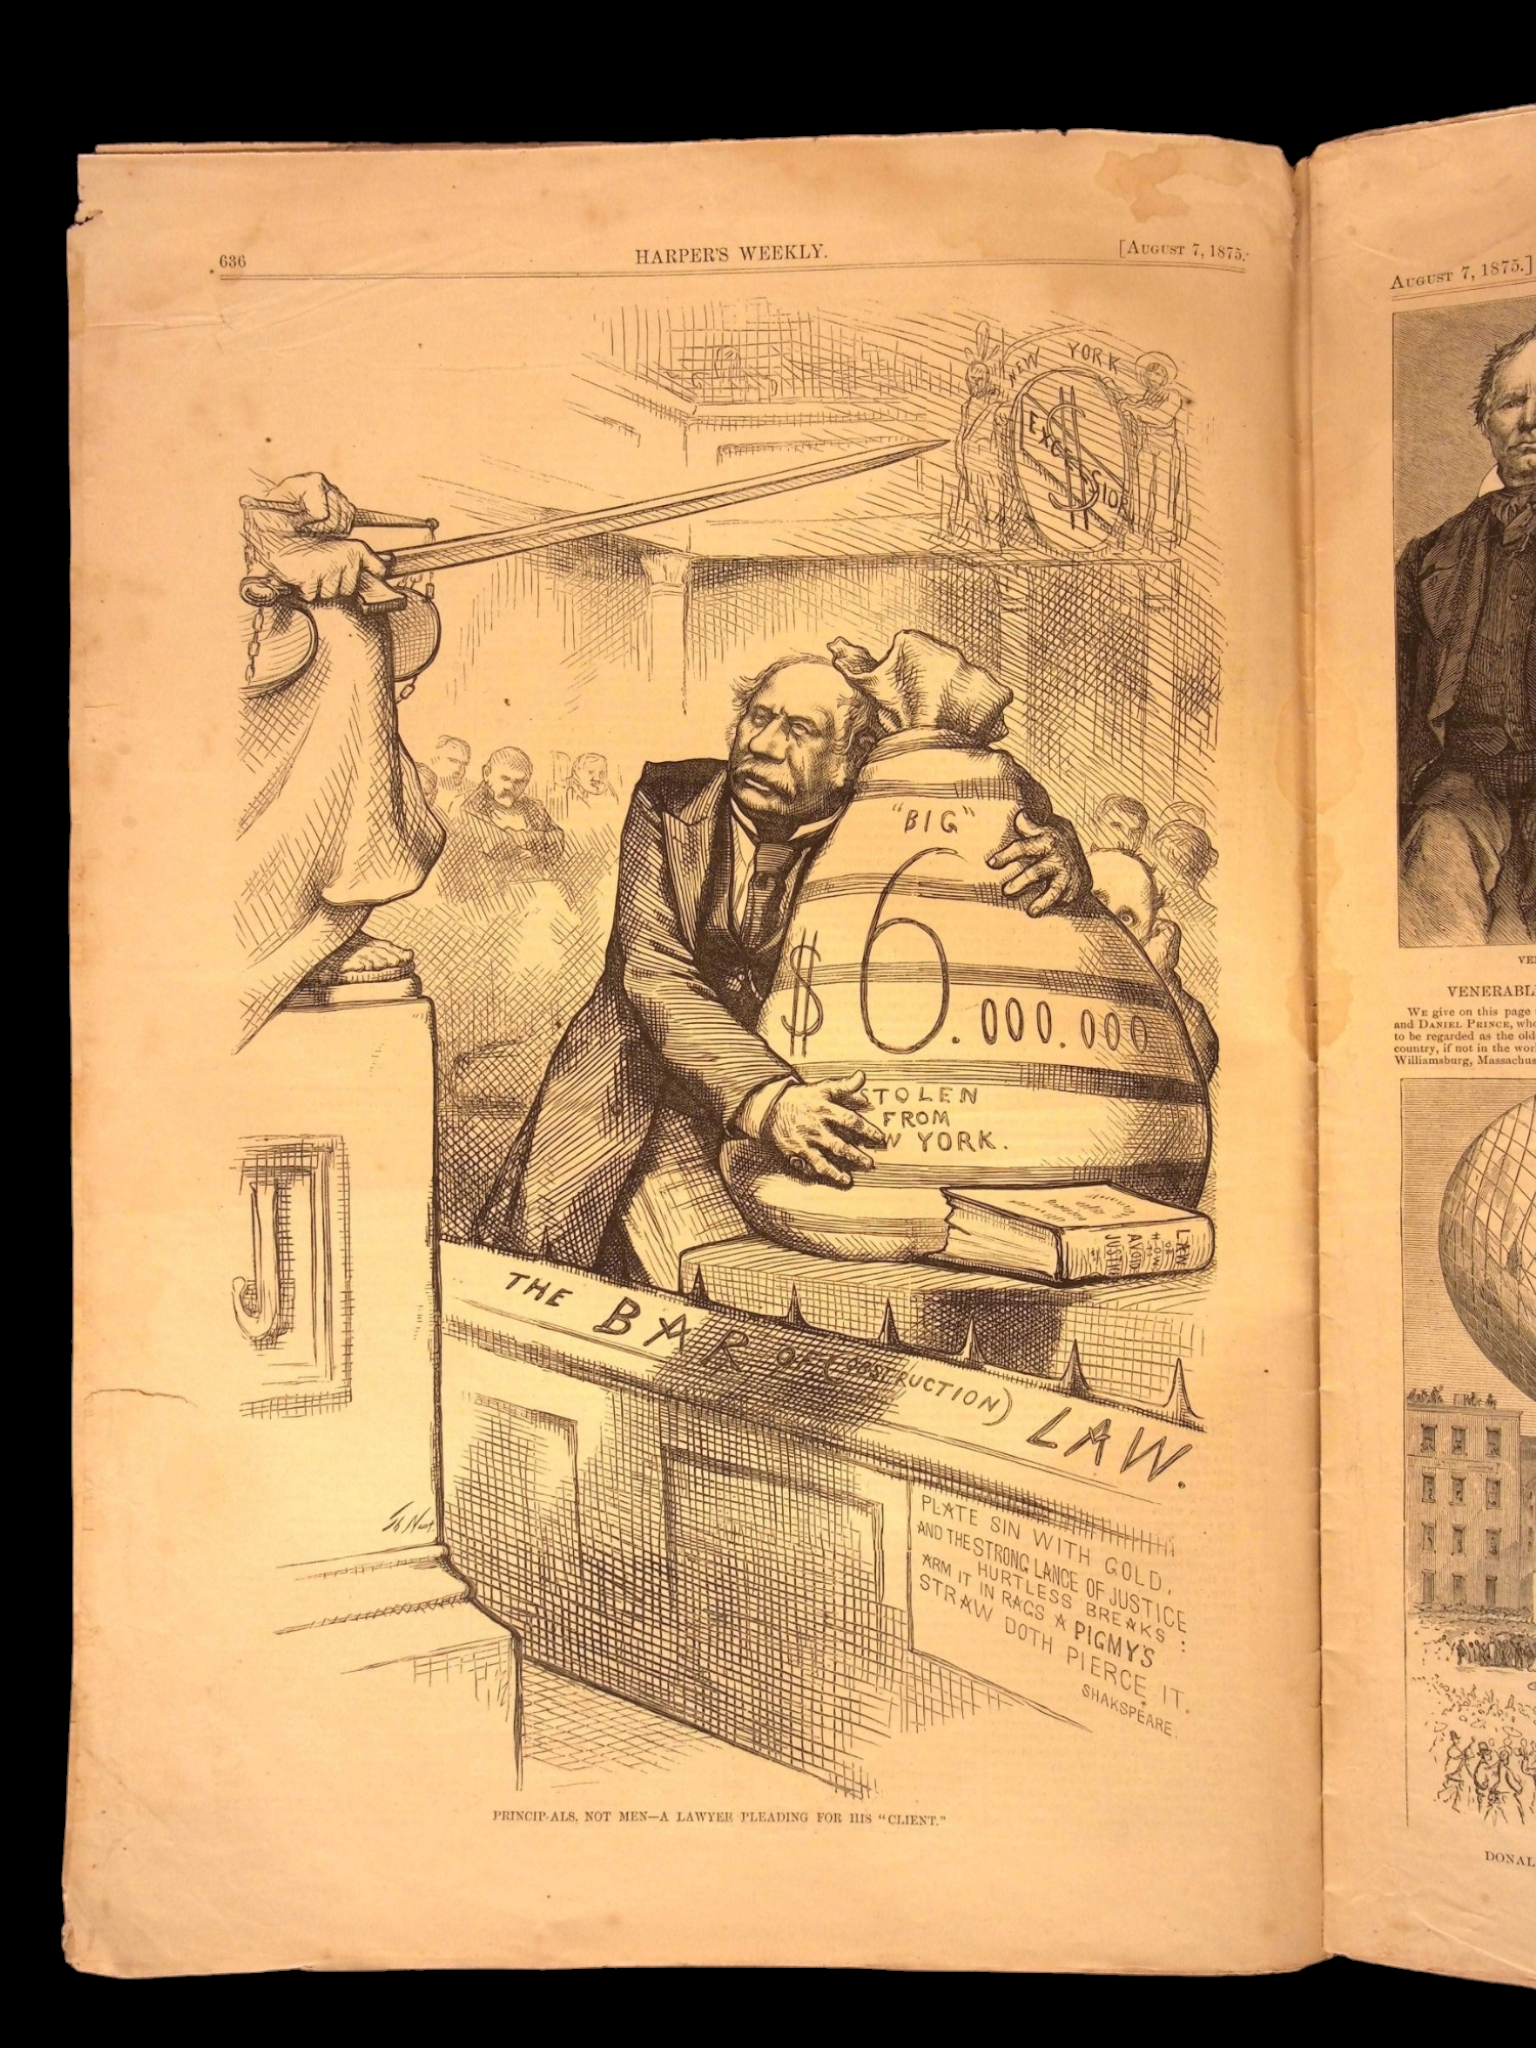 Harper's Weekly: "Oldest Living Twins," Hot Air Balloon, European Sketches  — Aug. 7, 1875